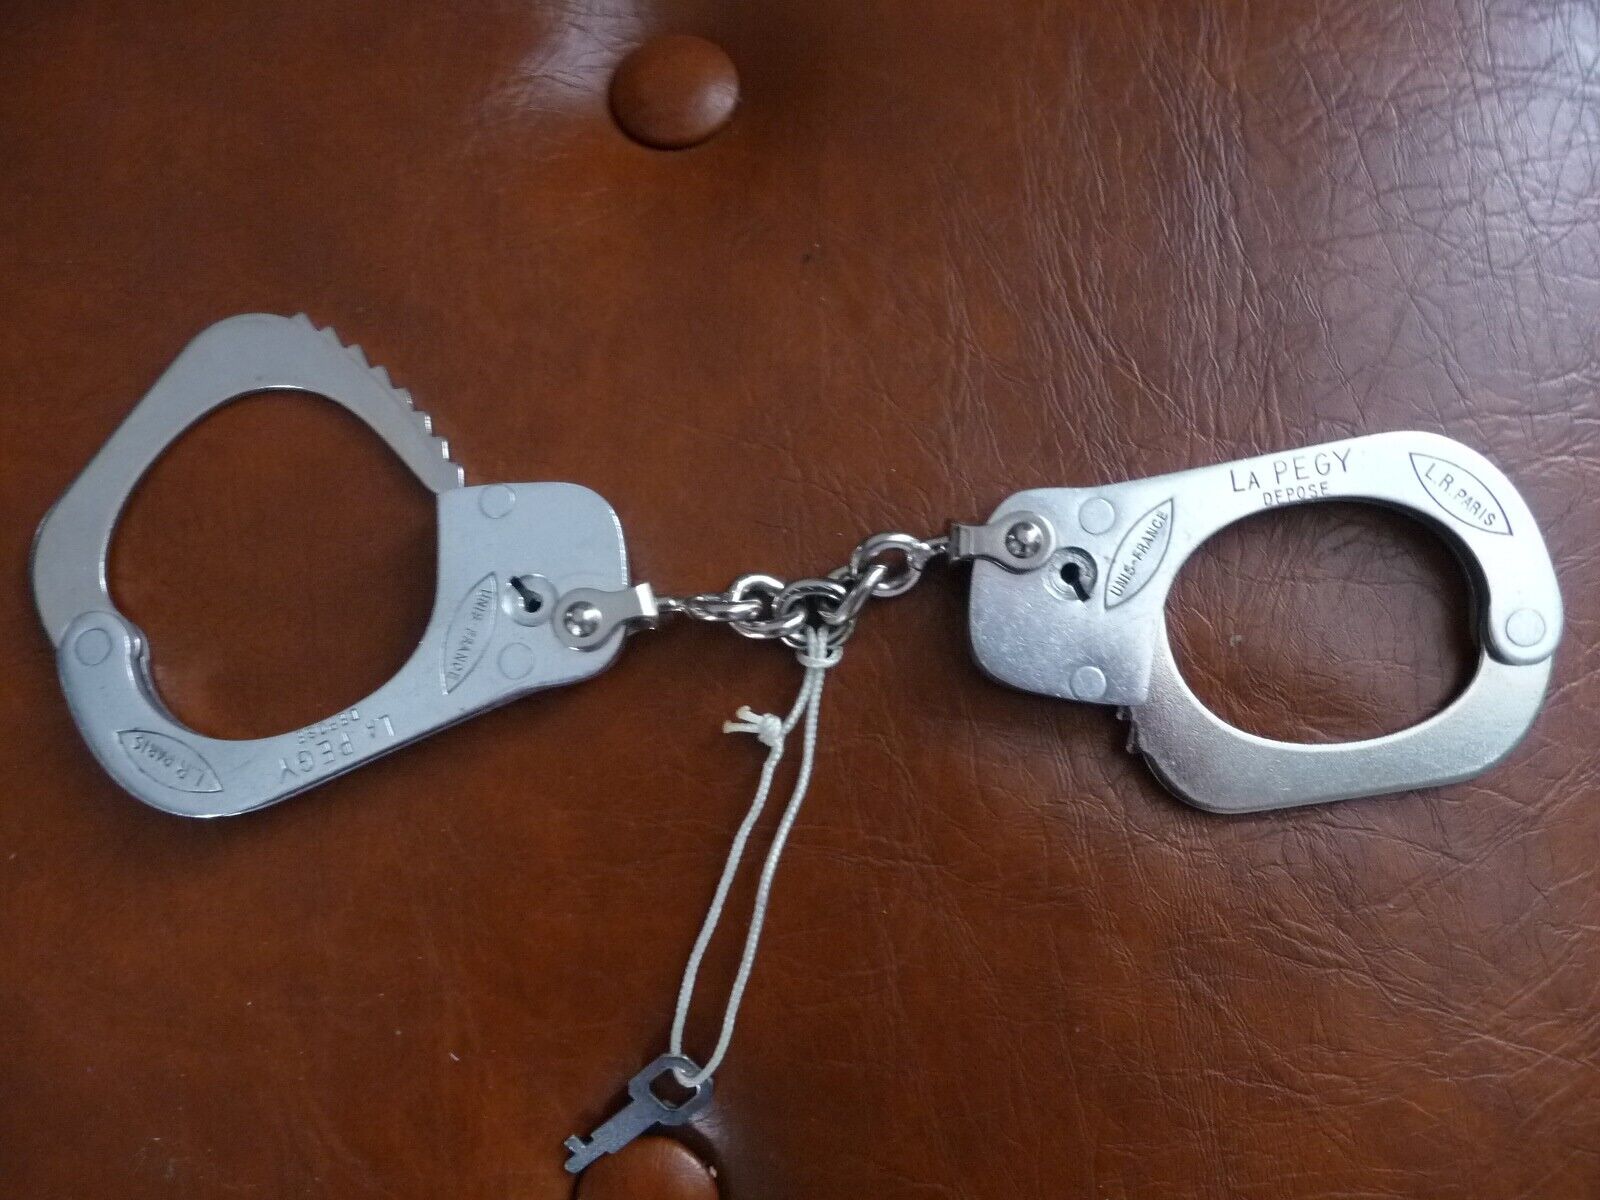 Original  french LaPegy national police Handcuffs Rare +orig key Excellent